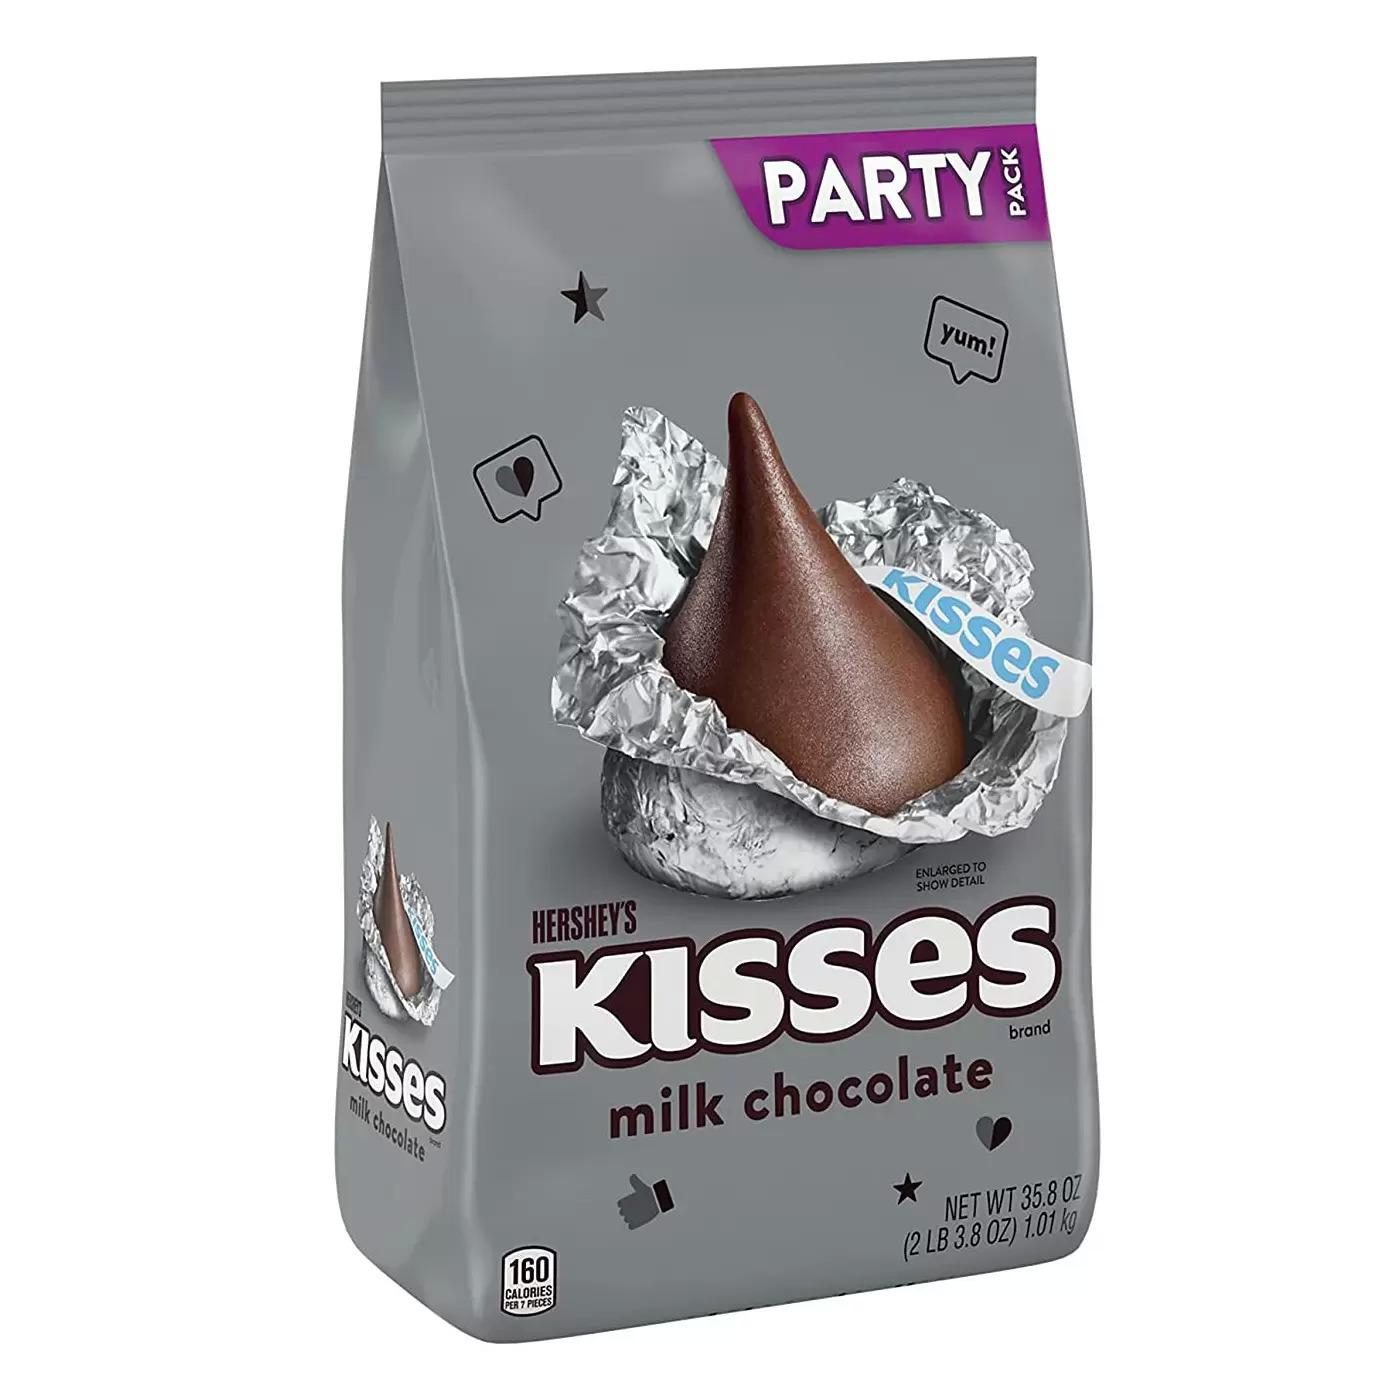 Hershey's Kisses Milk Chocolate Party Pack for $9.06 Shipped